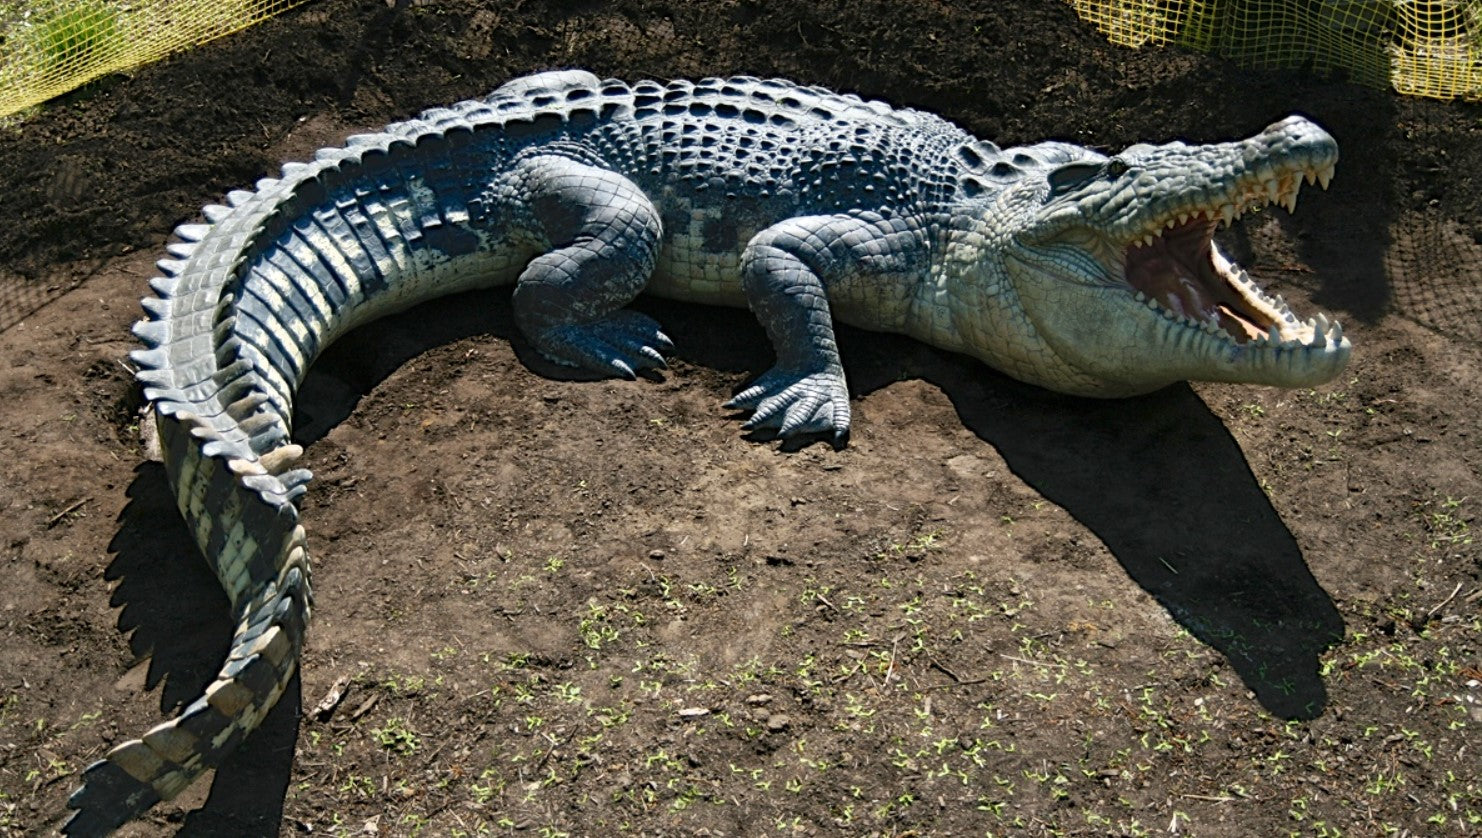 Five fascinating facts about the ancient (and awesome) saltwater crocodile